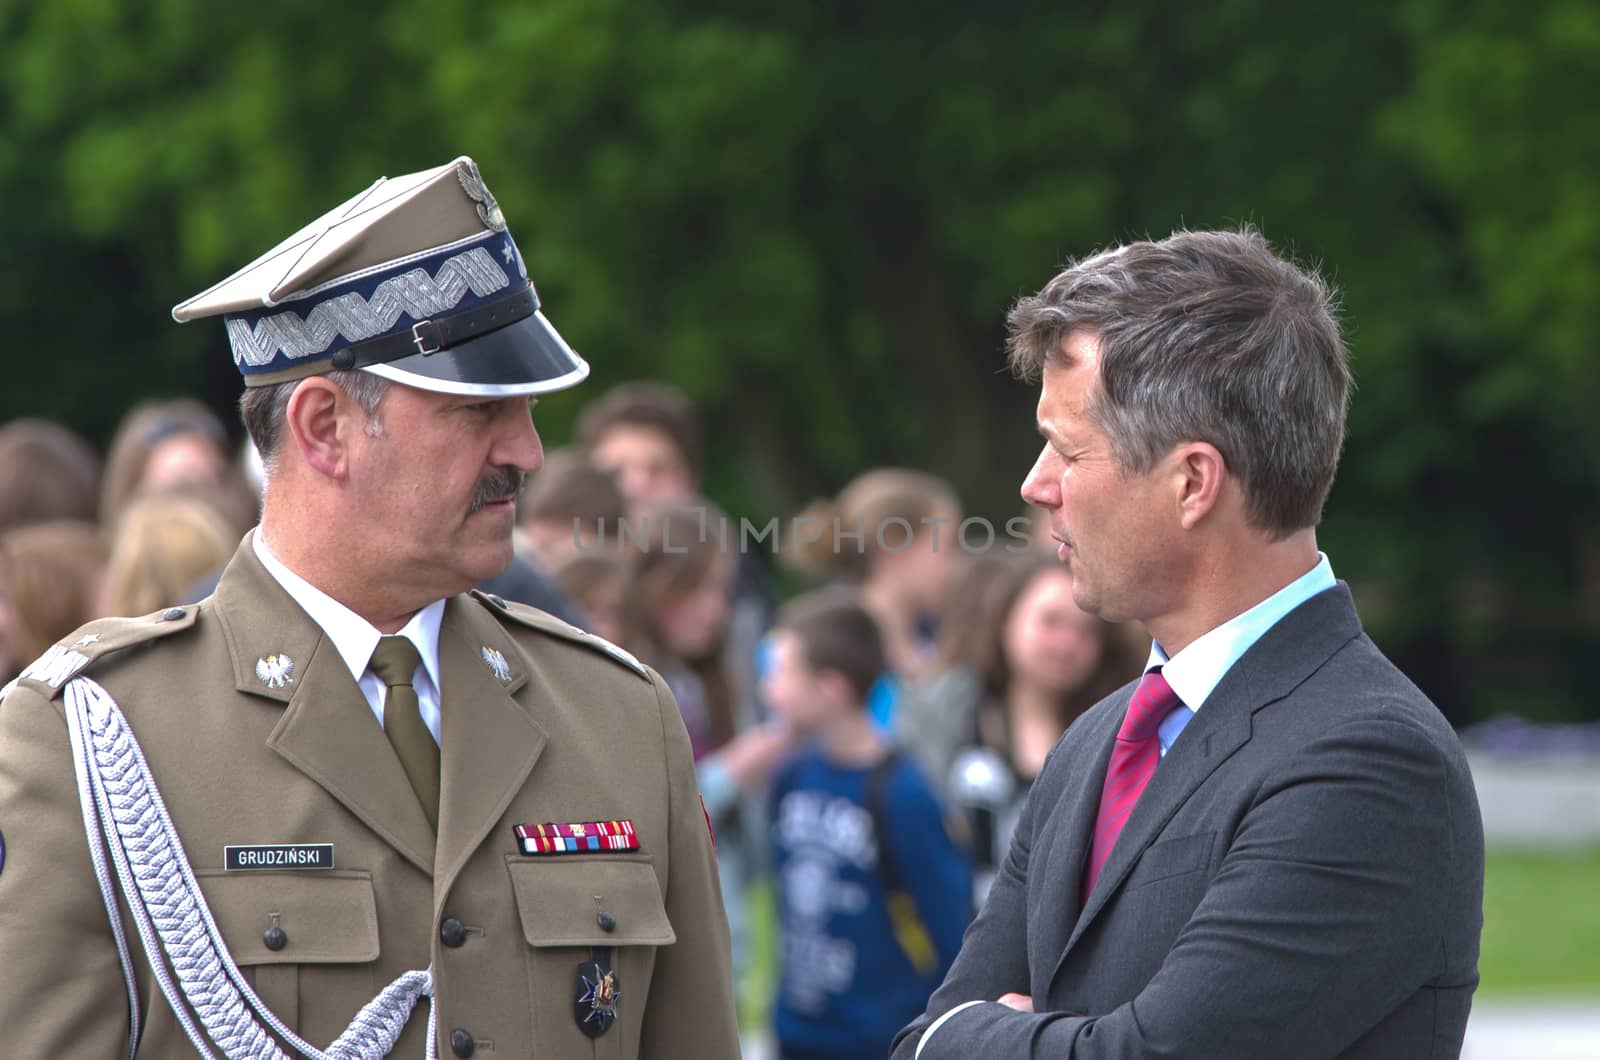 Warsaw, Poland - May 12, 2014: Danish Crown Prince Couple on state visit to Poland. Crown Prince Frederik talks with Polish general after the wreath laying ceremony.